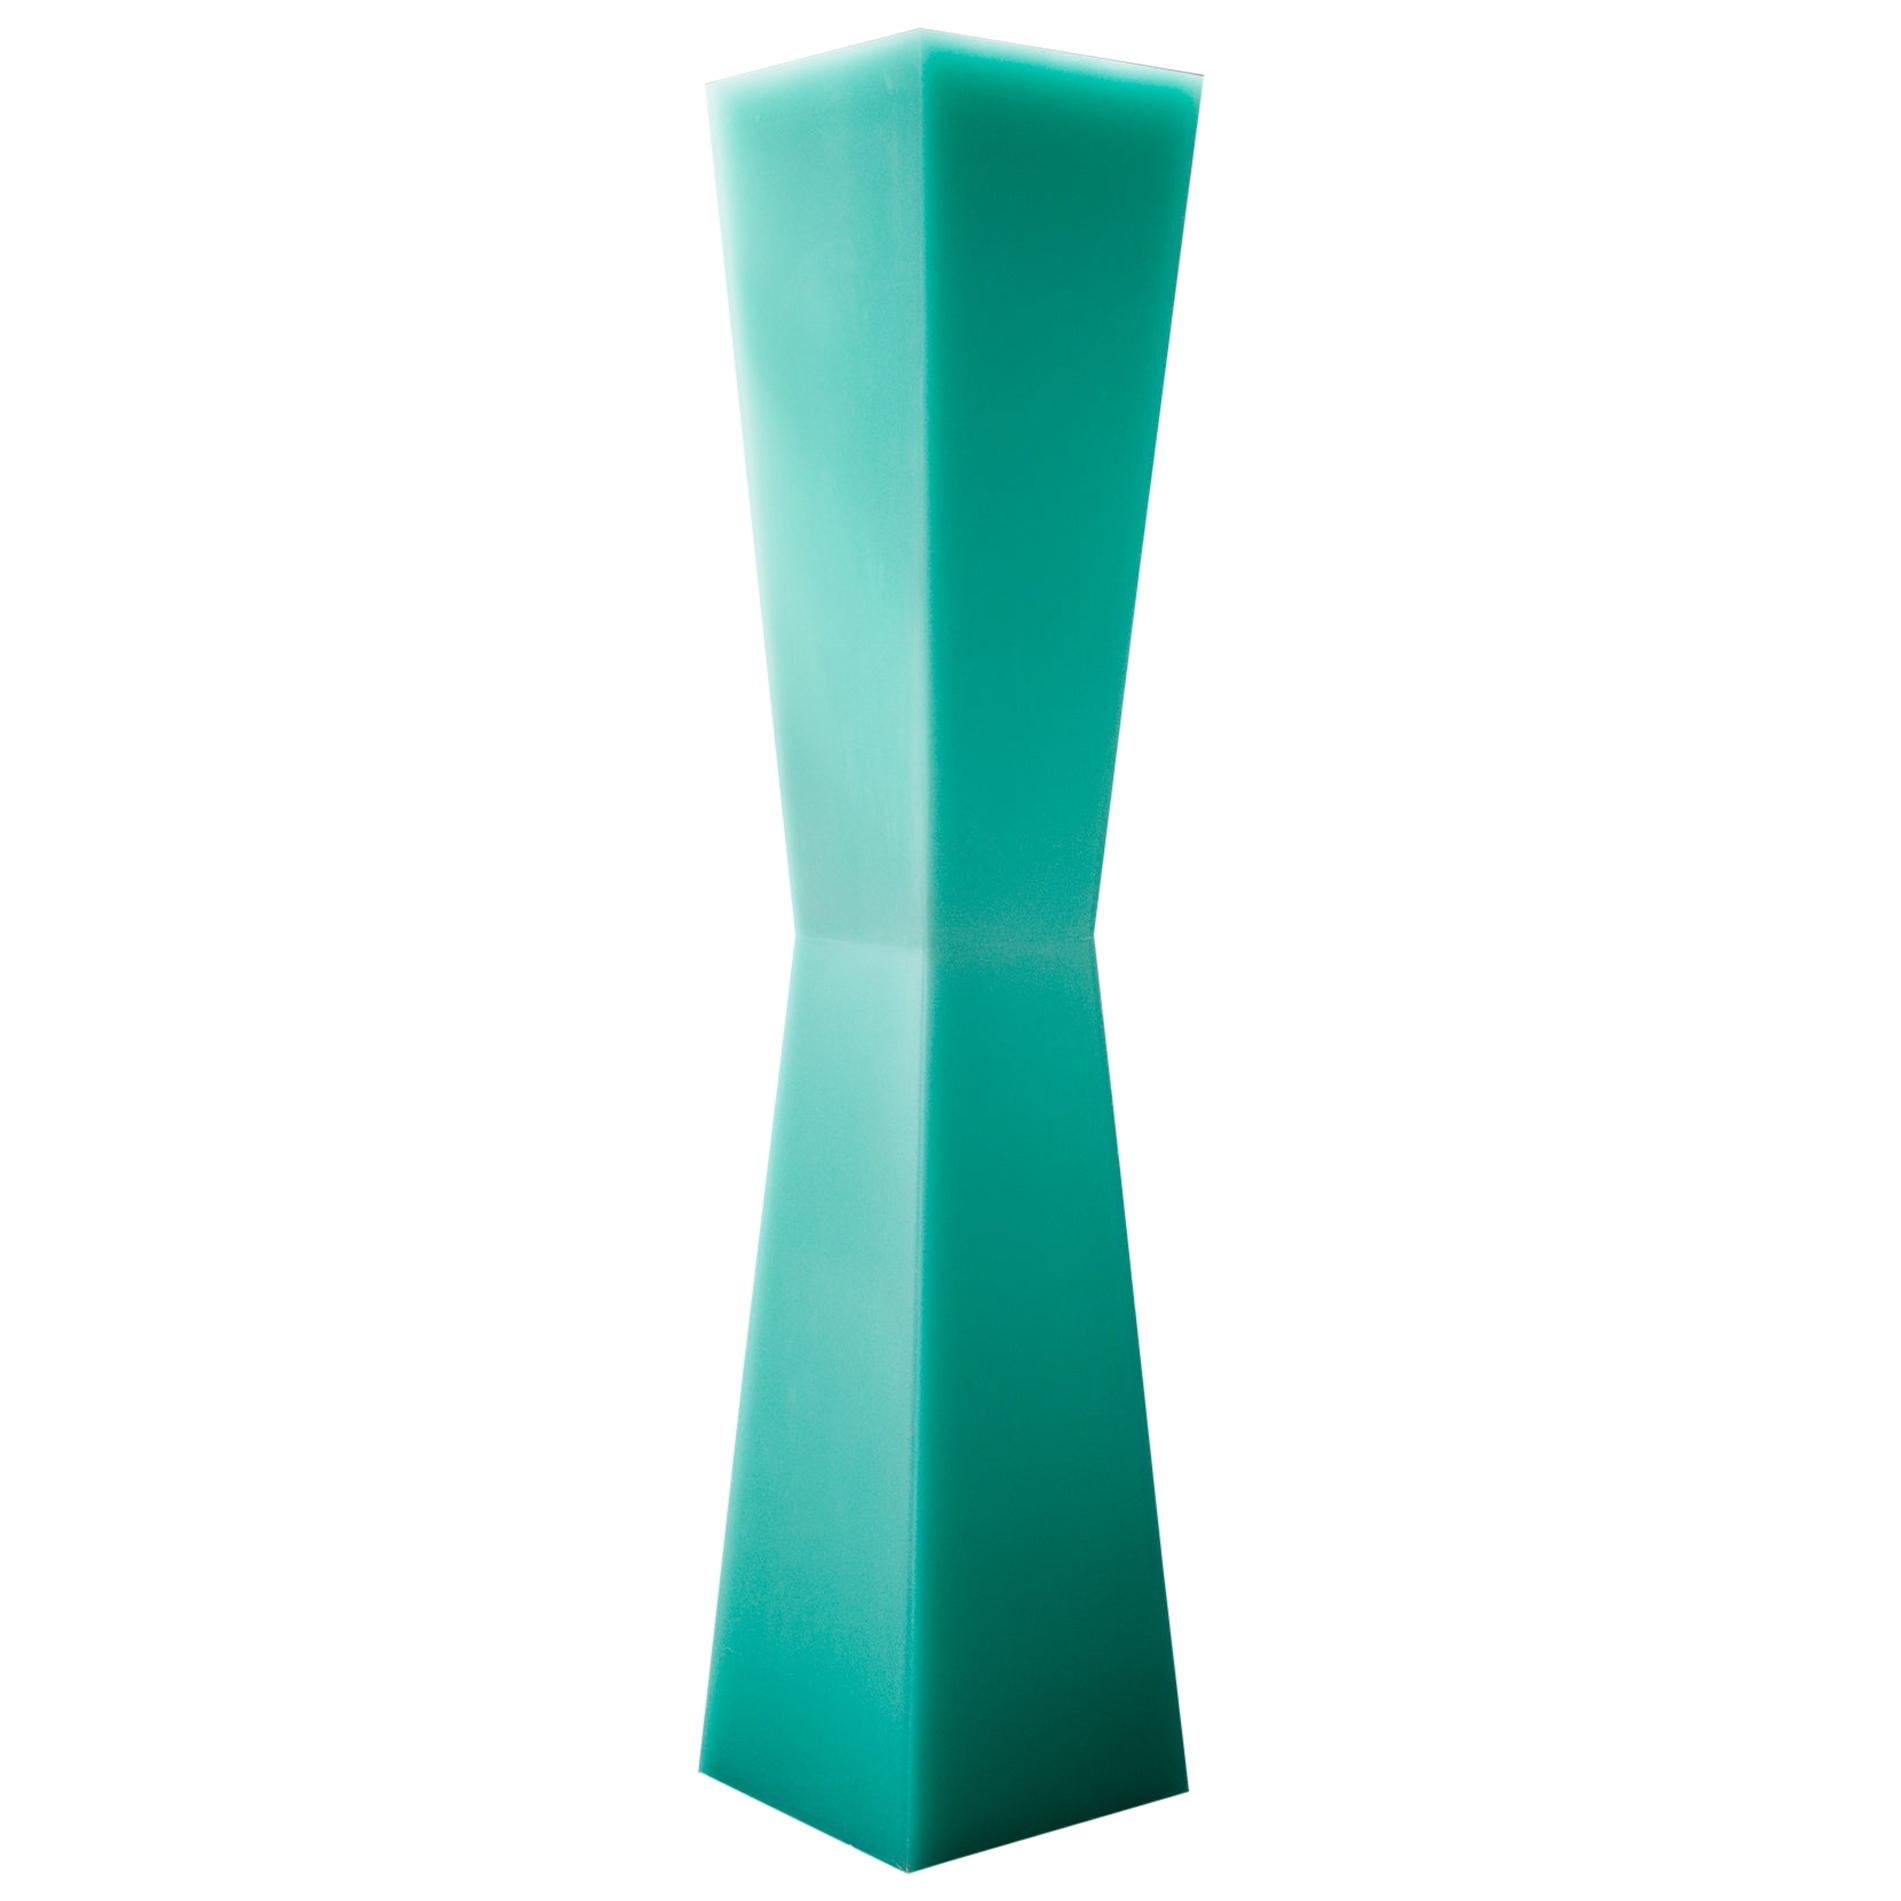 Column Resin Sculpture/Decor in Turquoise by Facture, REP by Tuleste Factory For Sale